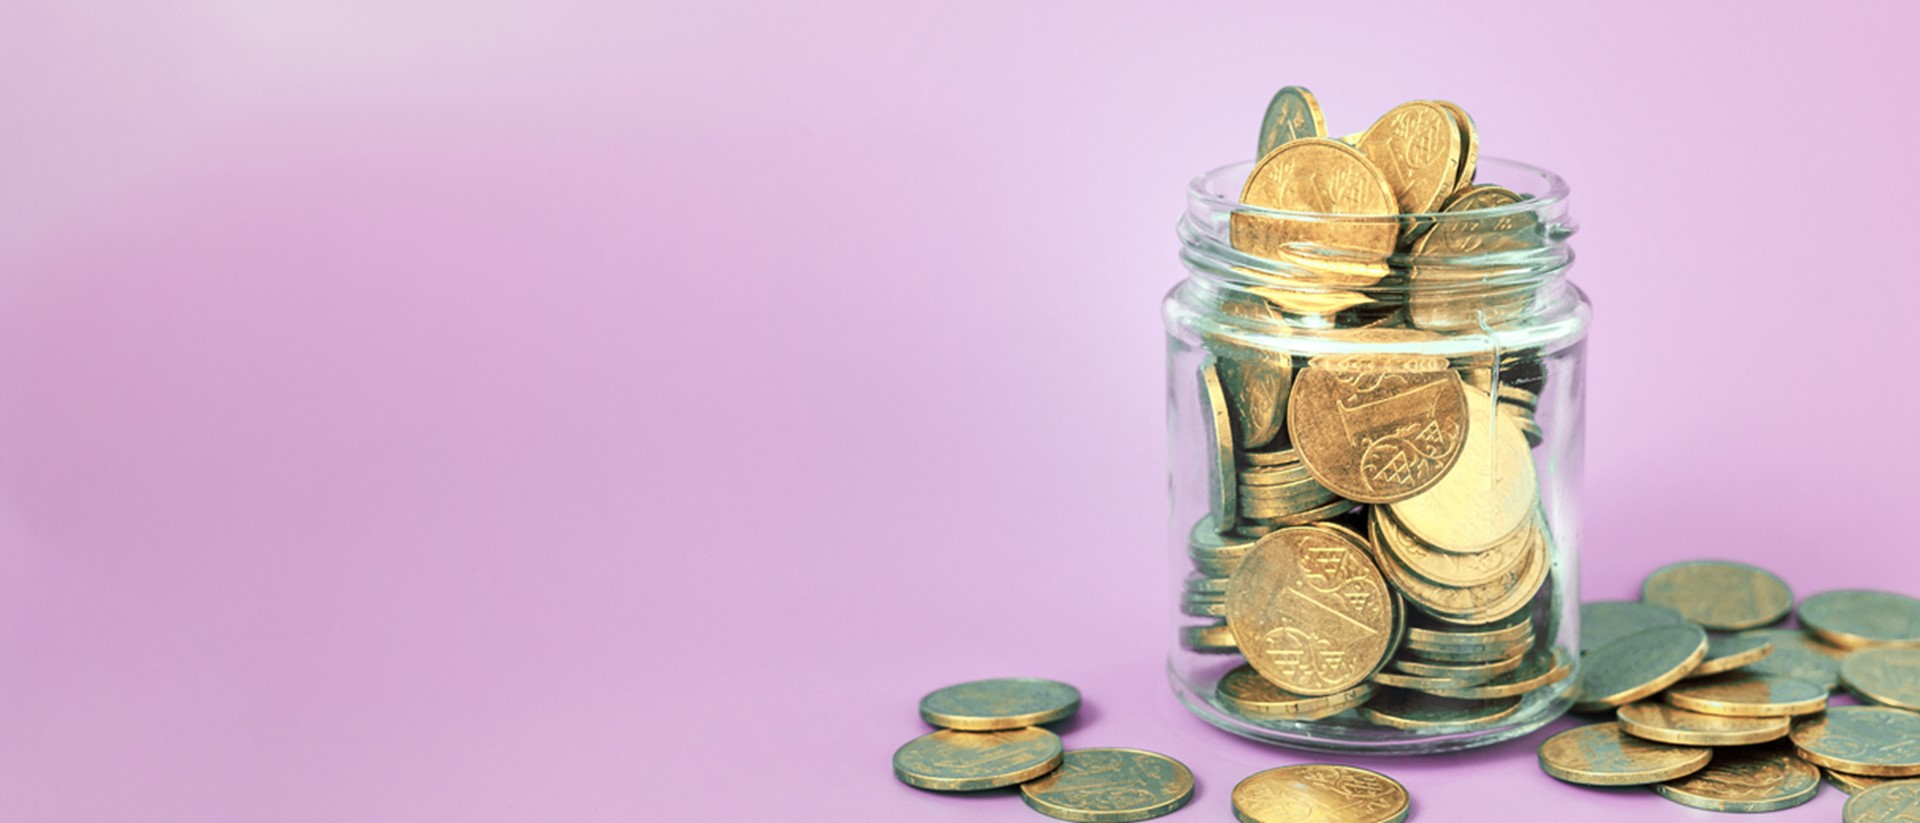 Image of coins in a glass jar on a pink background